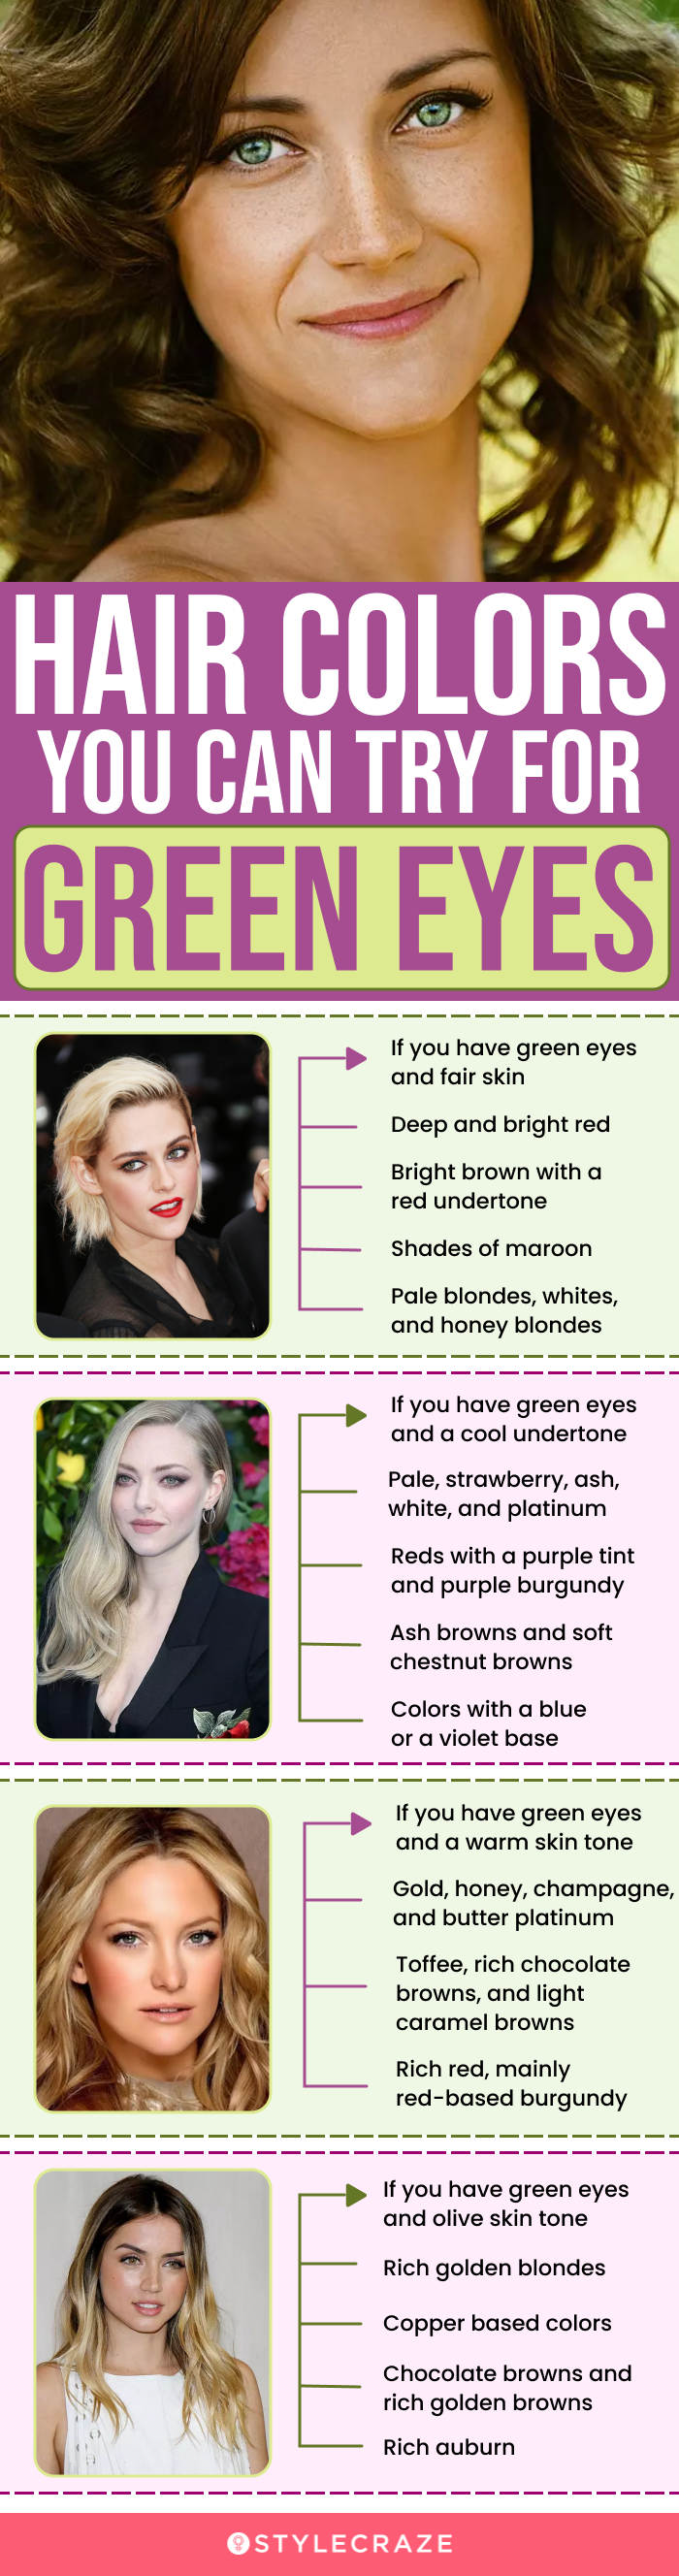 hair colors you can try for green eyes (infographic)